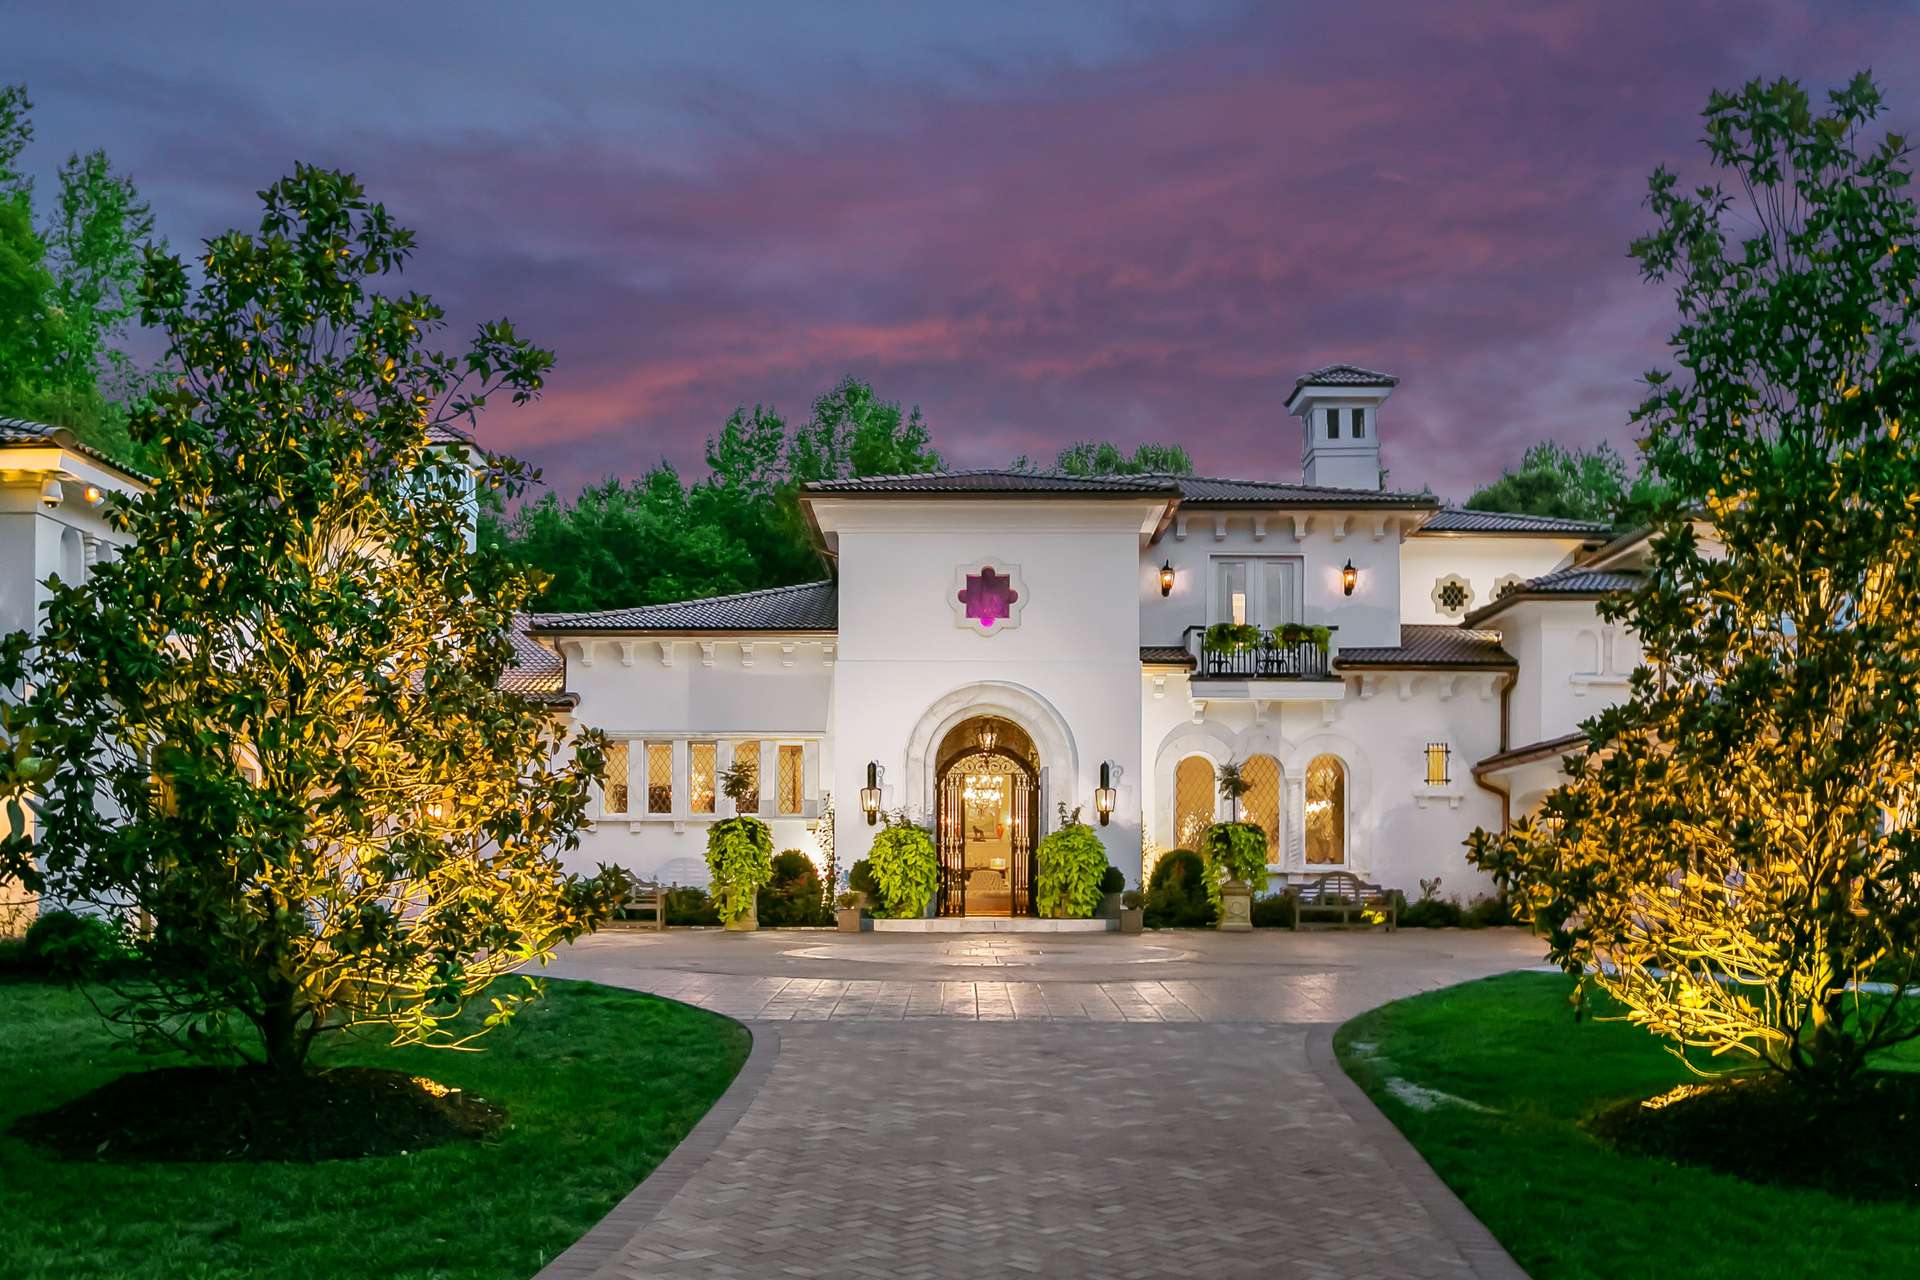 8371 Providence Road, Charlotte, NC, A luxury Mediterranean-style, Mizner-inspired property. Presented by Liza Caminiti, Senior Broker-in-Charge at Ivester Jackson | Christie’s International Real Estate • FINEST RESIDENCES